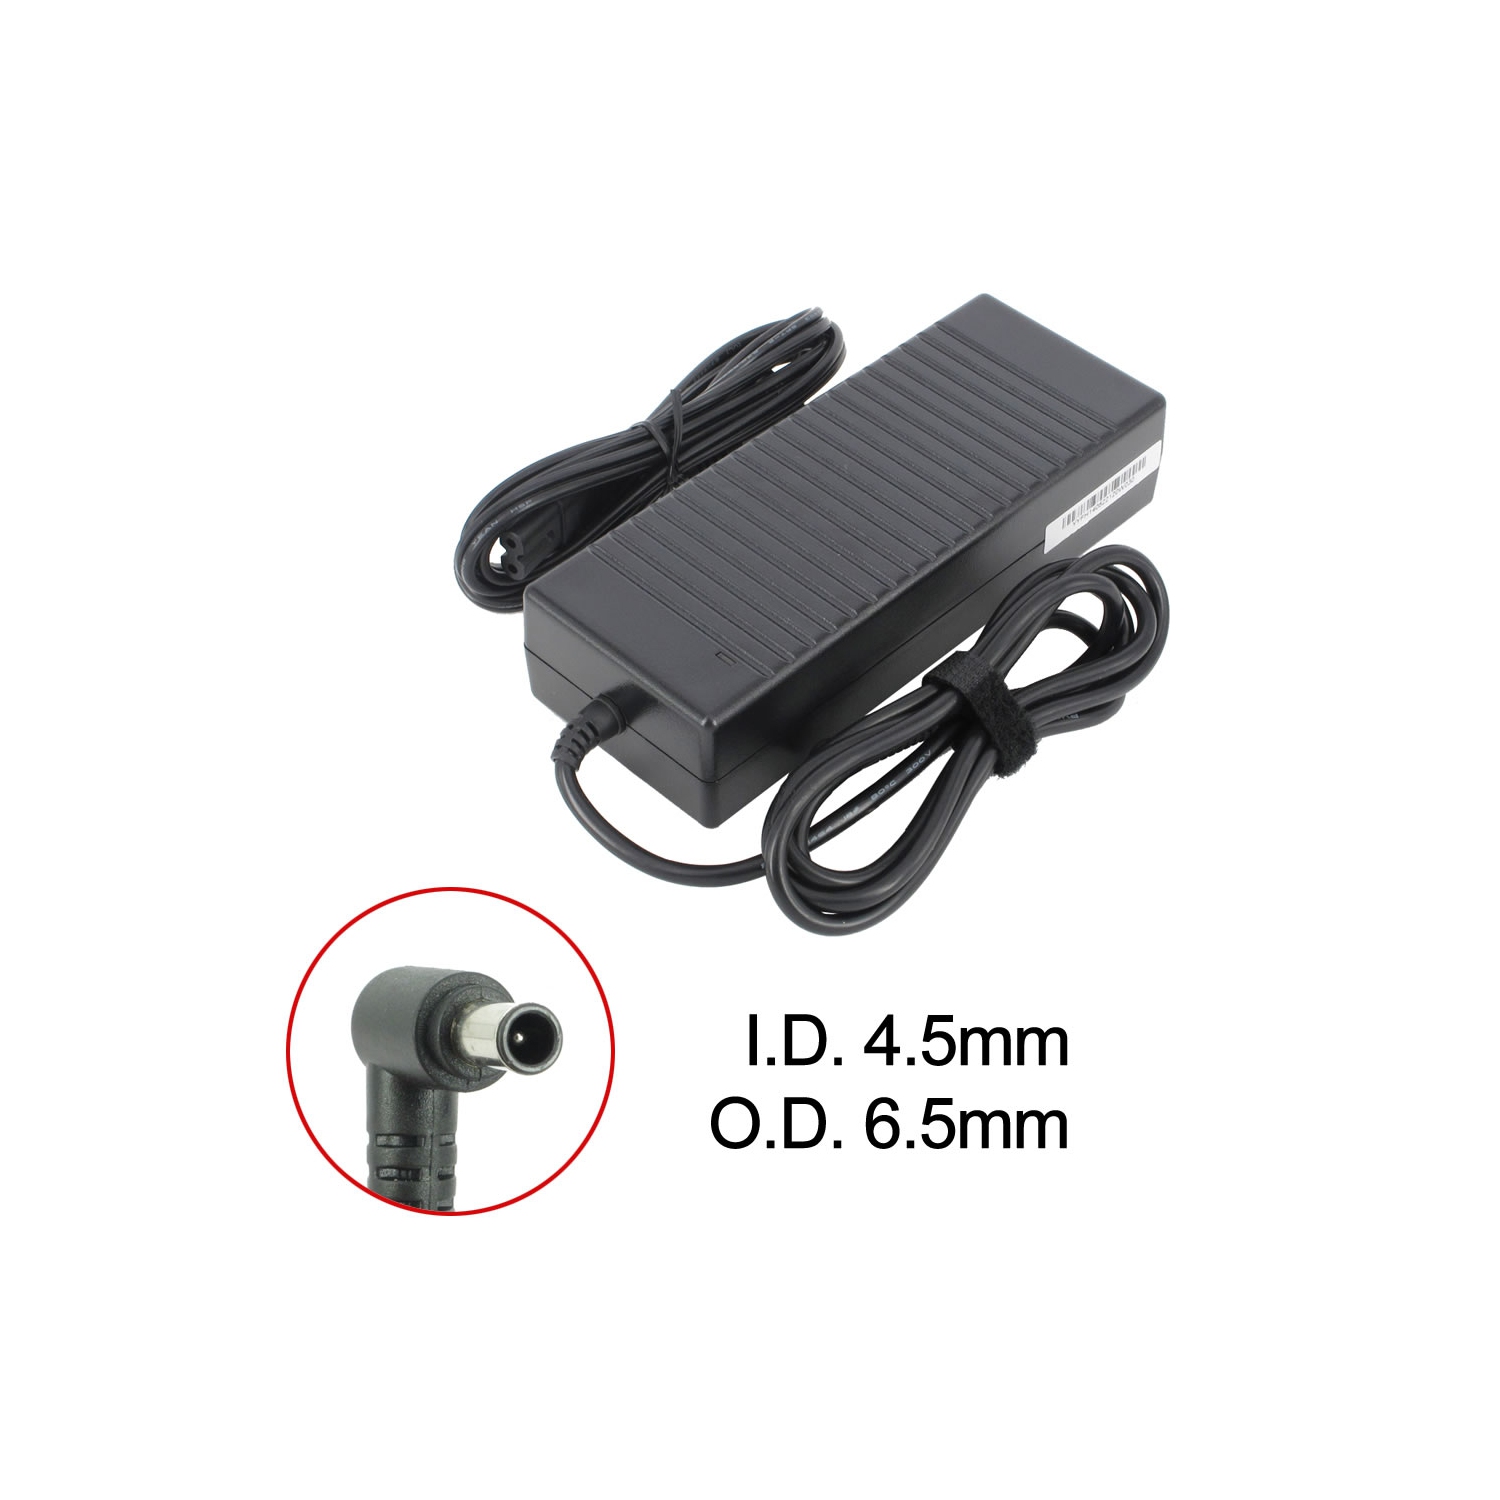 Brand New Laptop AC Adapter for Sony VAIO VGN-AW11XU/Q, PCGA-AC19V15, PCGA-AC19V25, PCGA-AC19V7, VGP-AC19V16